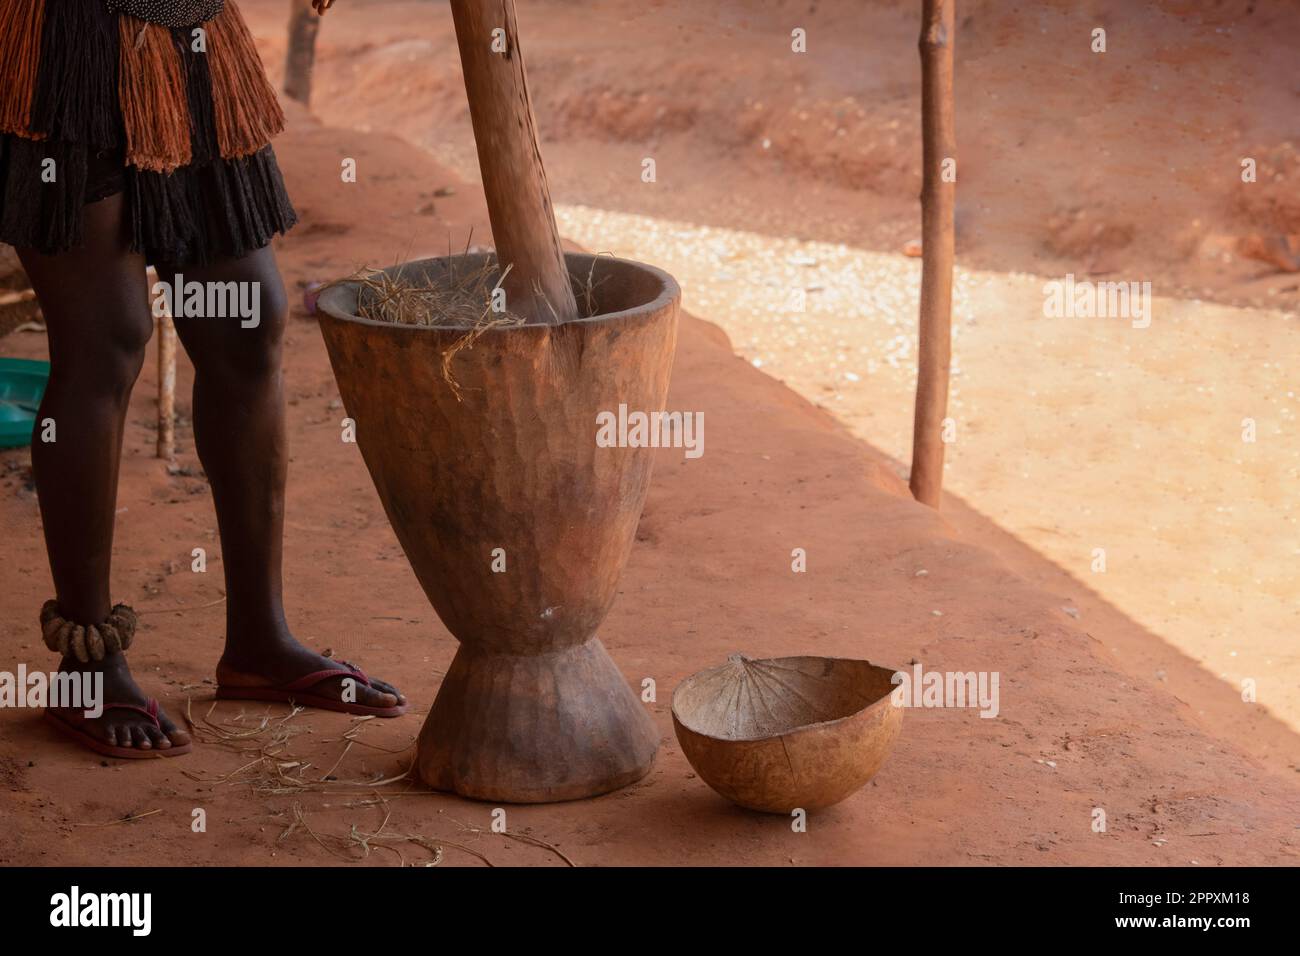 Crop anonymous African man in traditional clothes pestling plants in mortar during process of preparation of national meal on dusty street Stock Photo